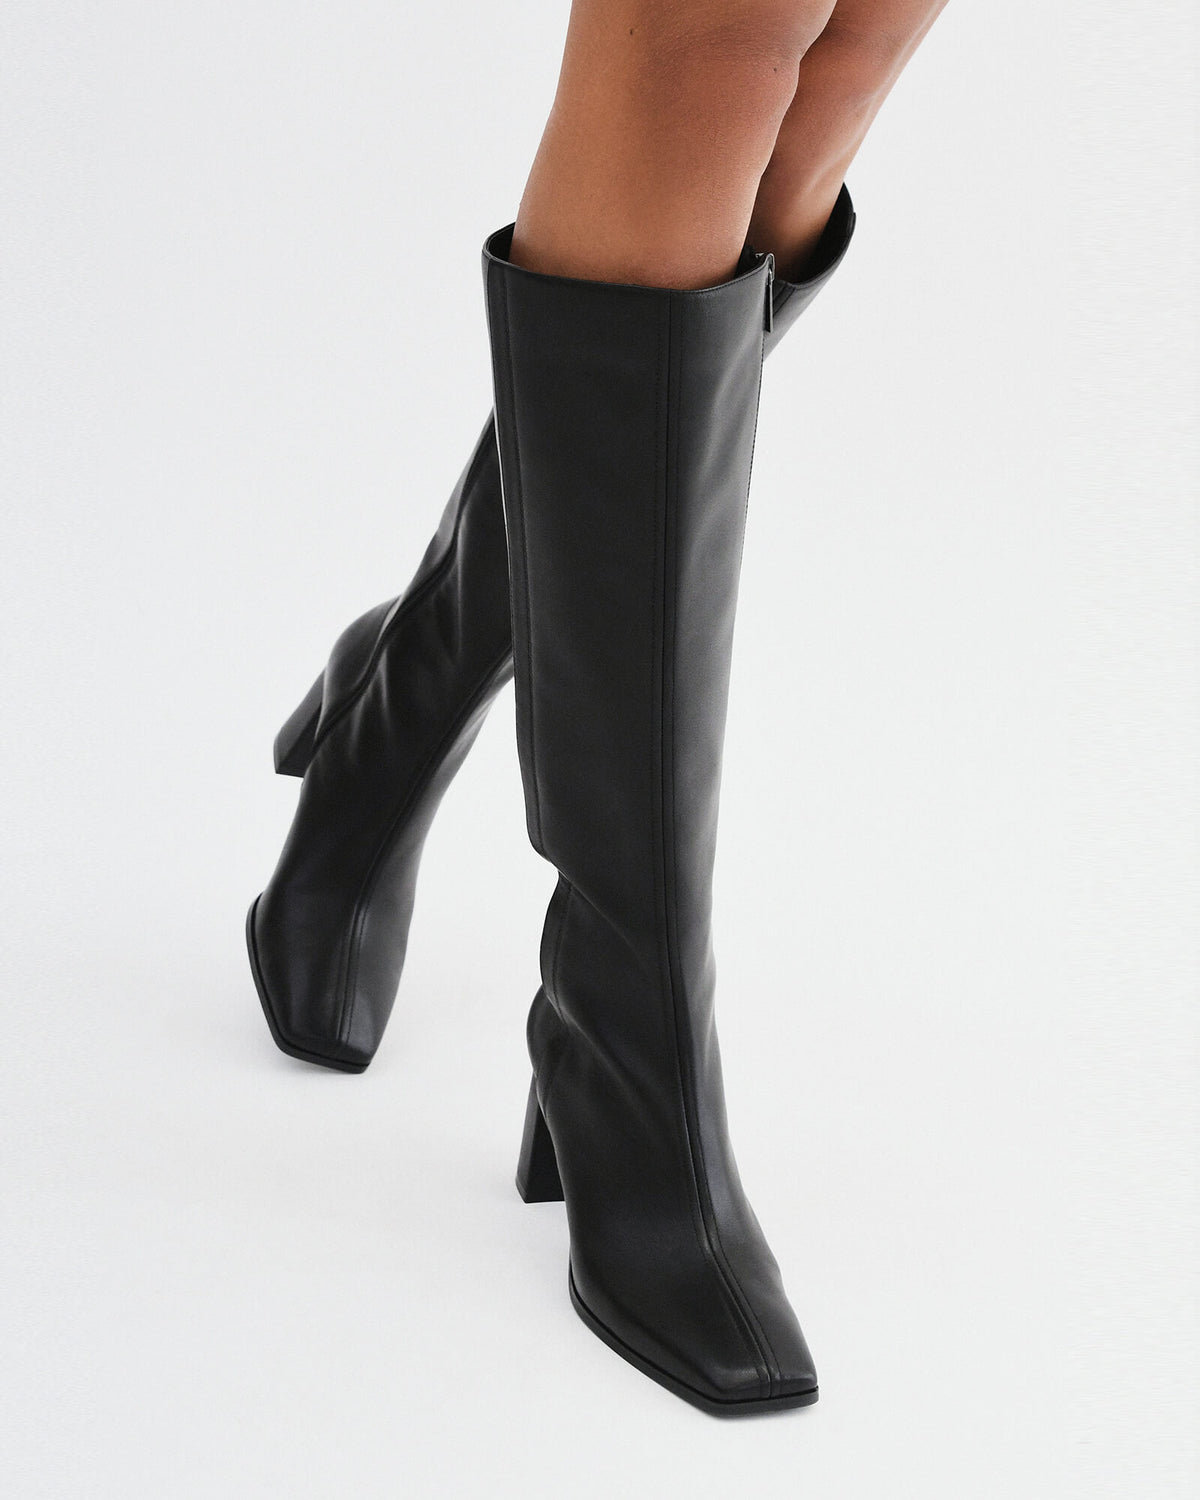 NELLIE KNEE BOOTS BLACK LEATHER